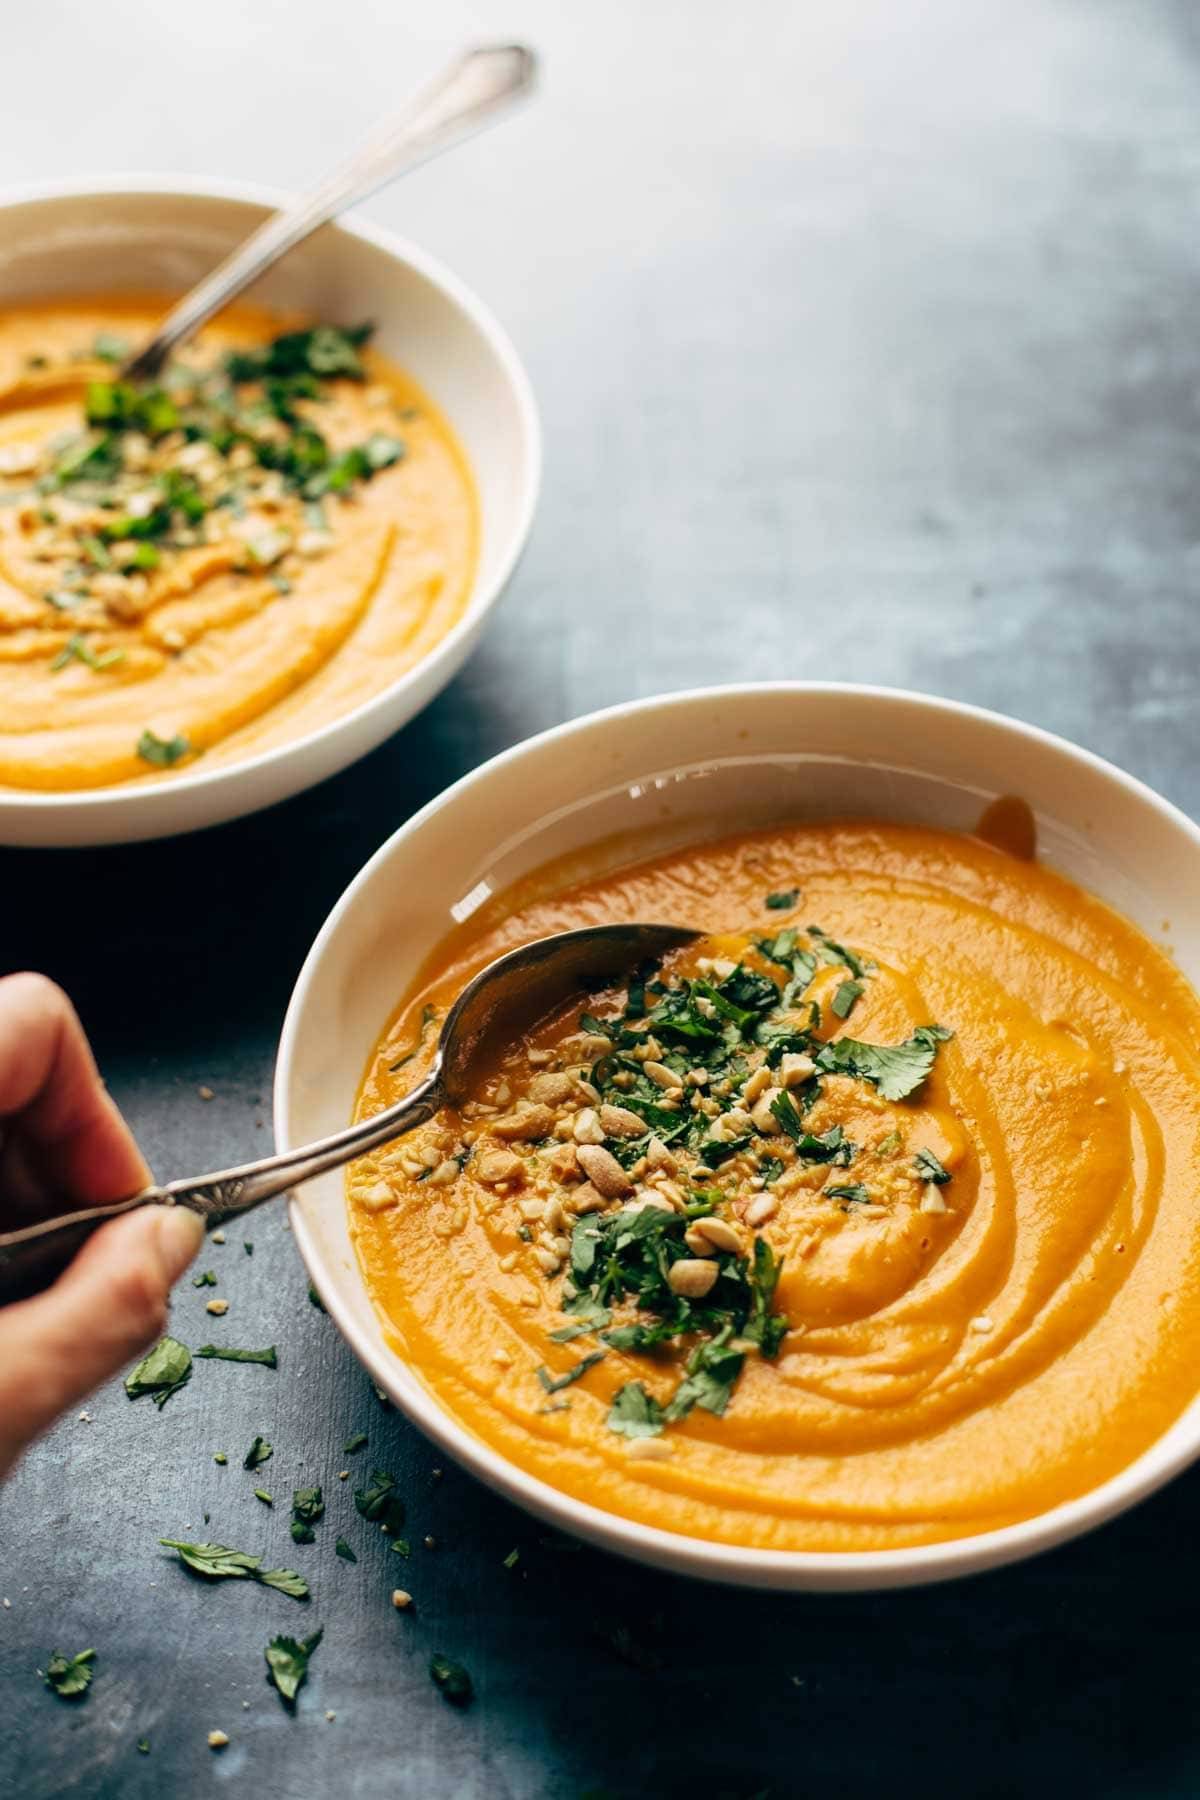 Spicy Vegan Carrot Soup made with coconut milk, onions, carrots, garlic, and curry paste. Easy, vegan, gluten free, awesome. | pinchofyum.com